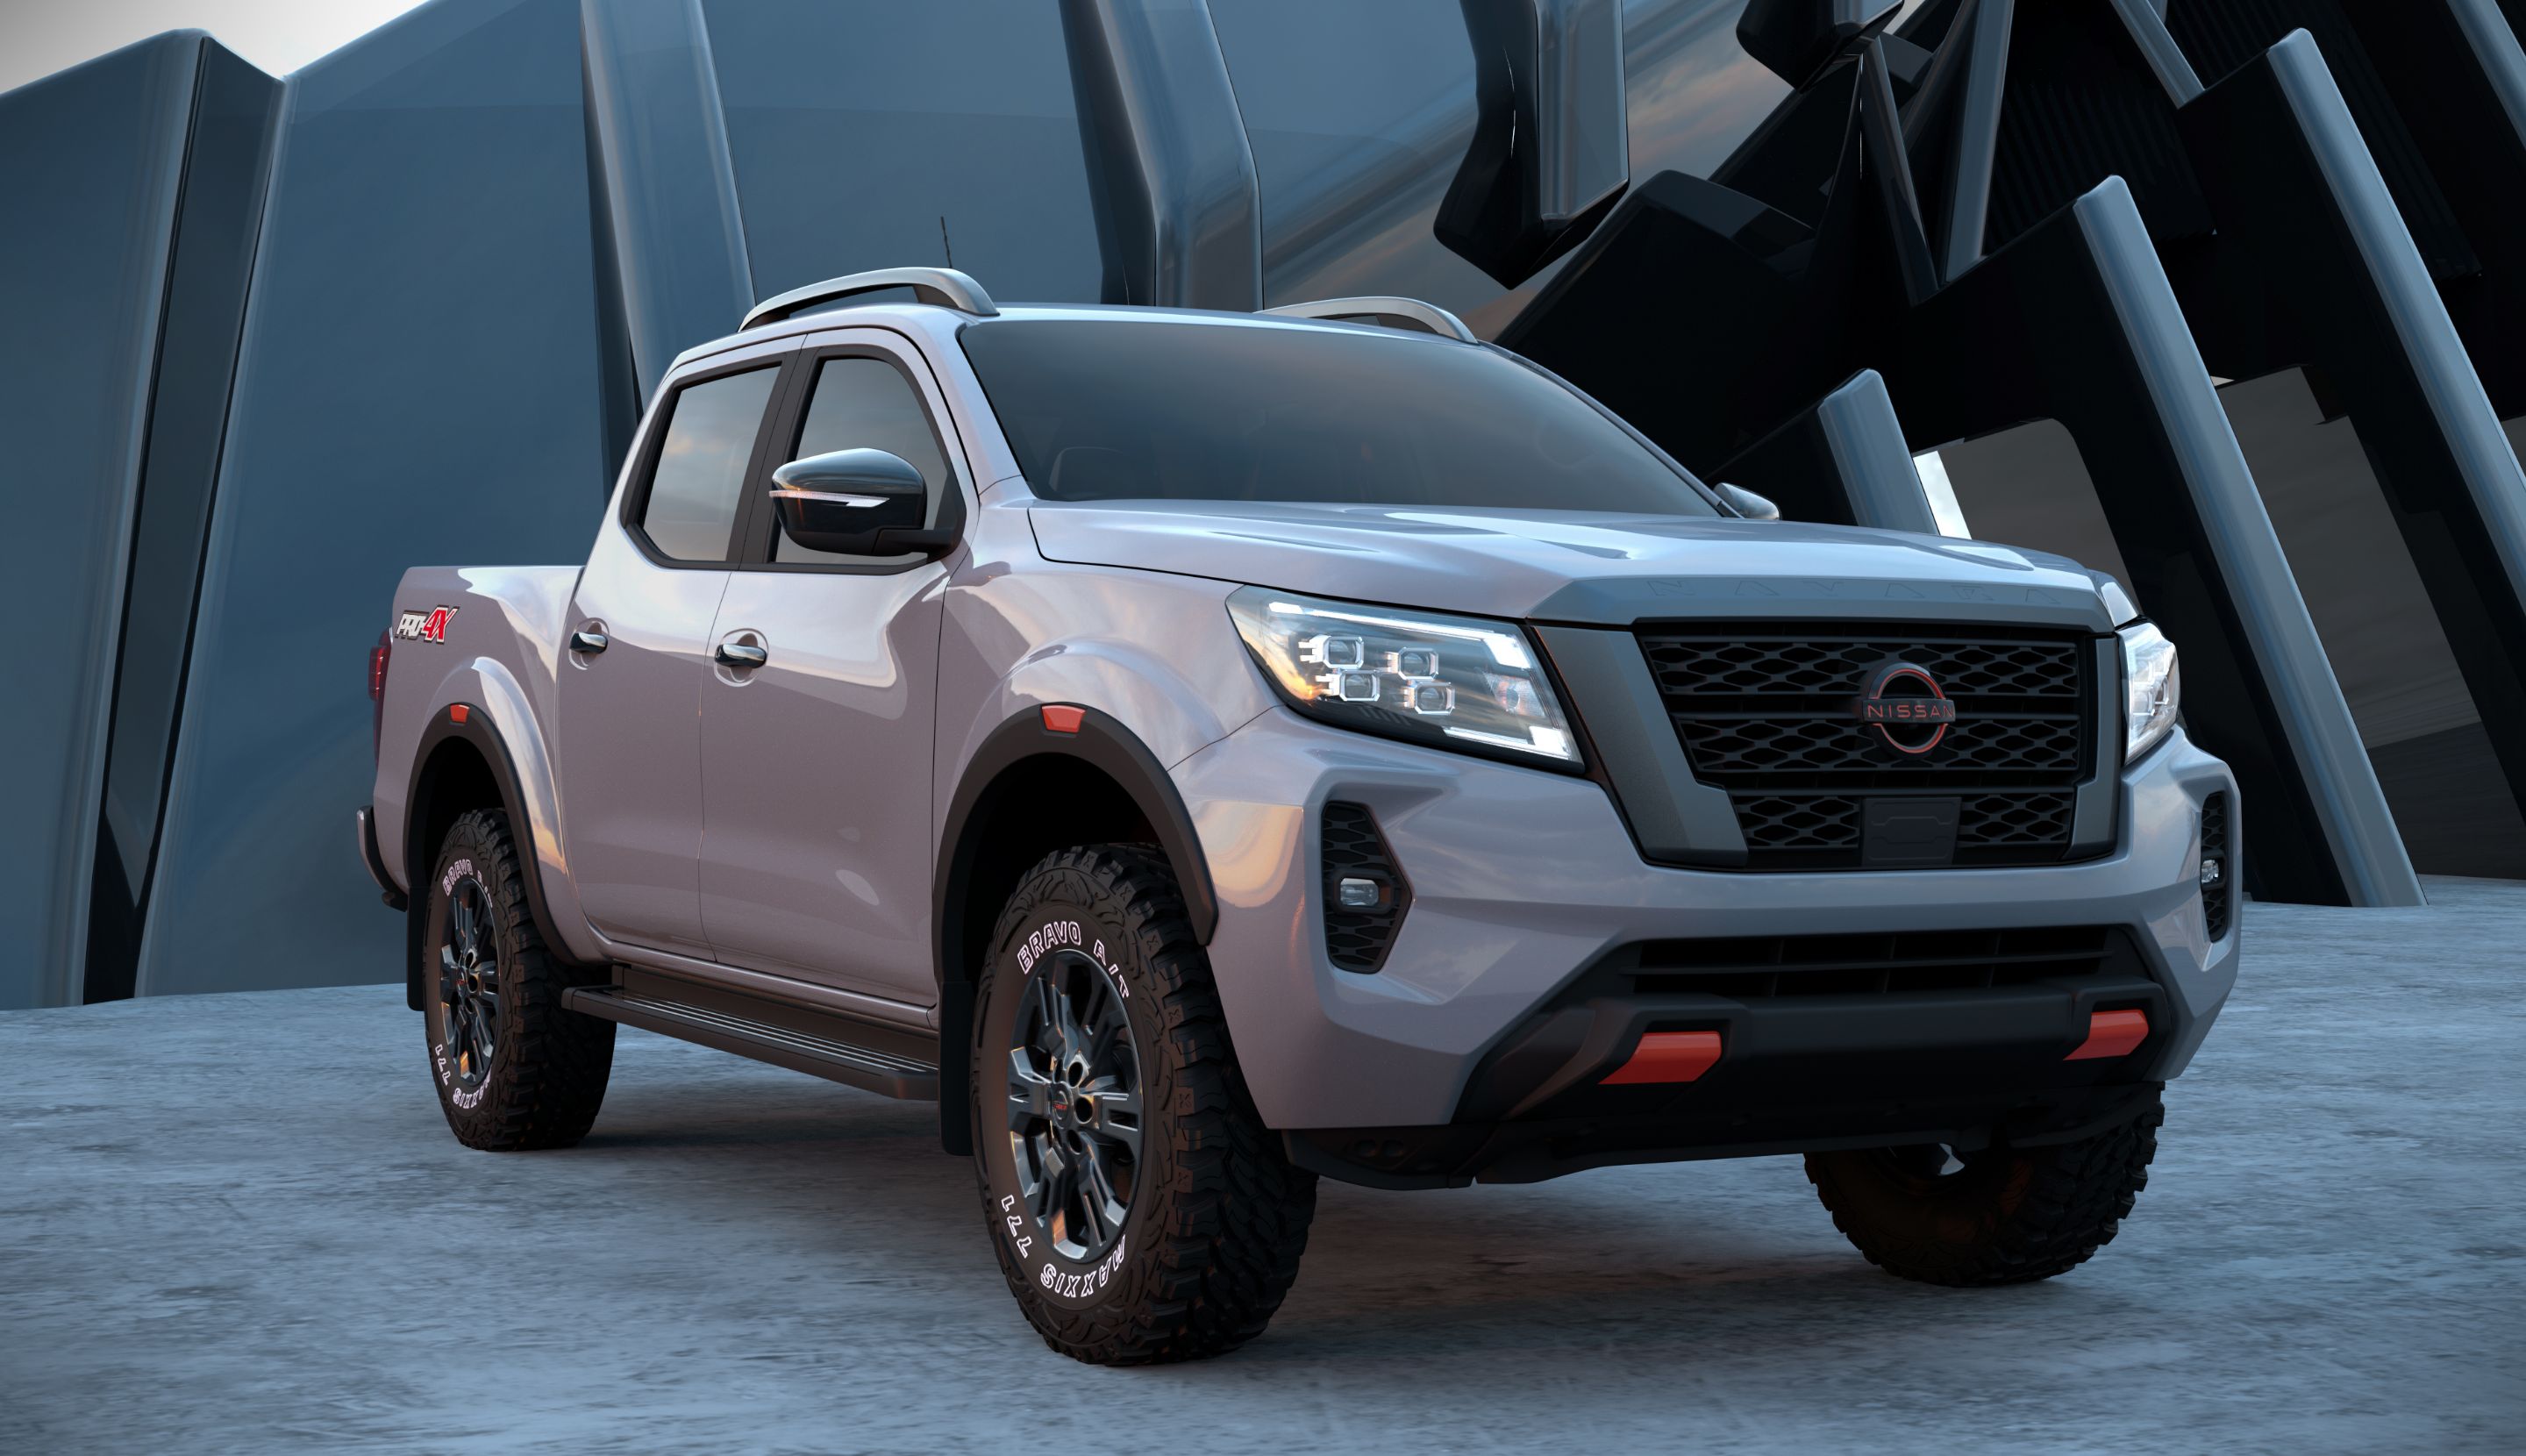 New Nissan Navara comes with latest technologies and fresh styling